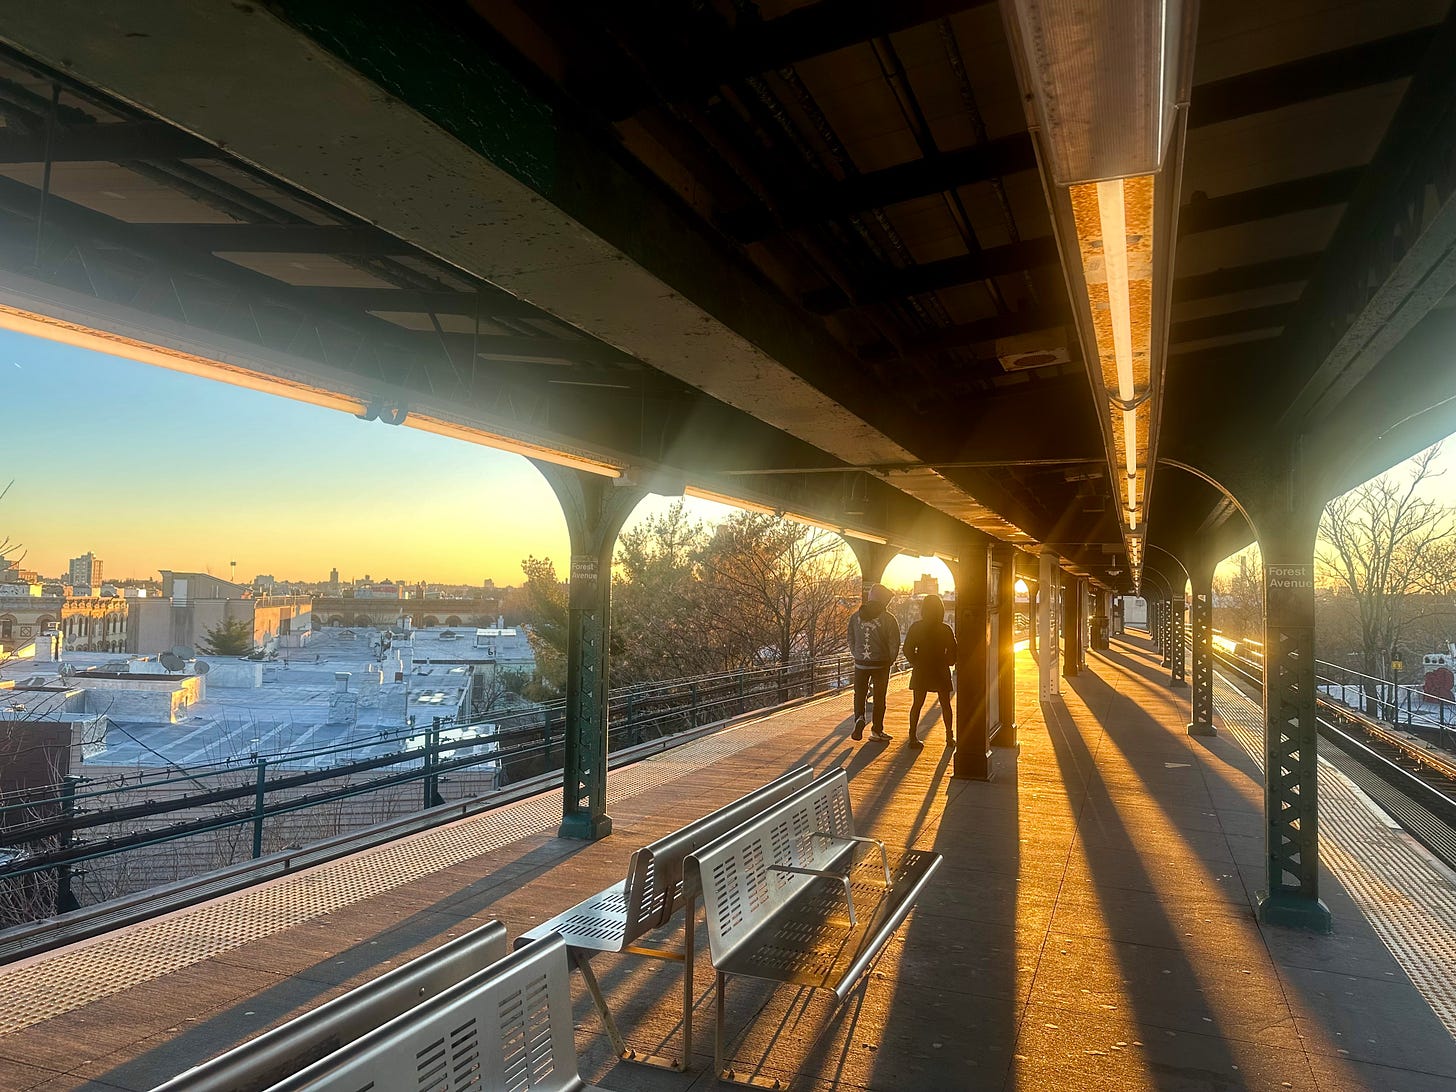 The gorgeous Forest Ave subway stop at sunset (Photo: Elke Nominikat)